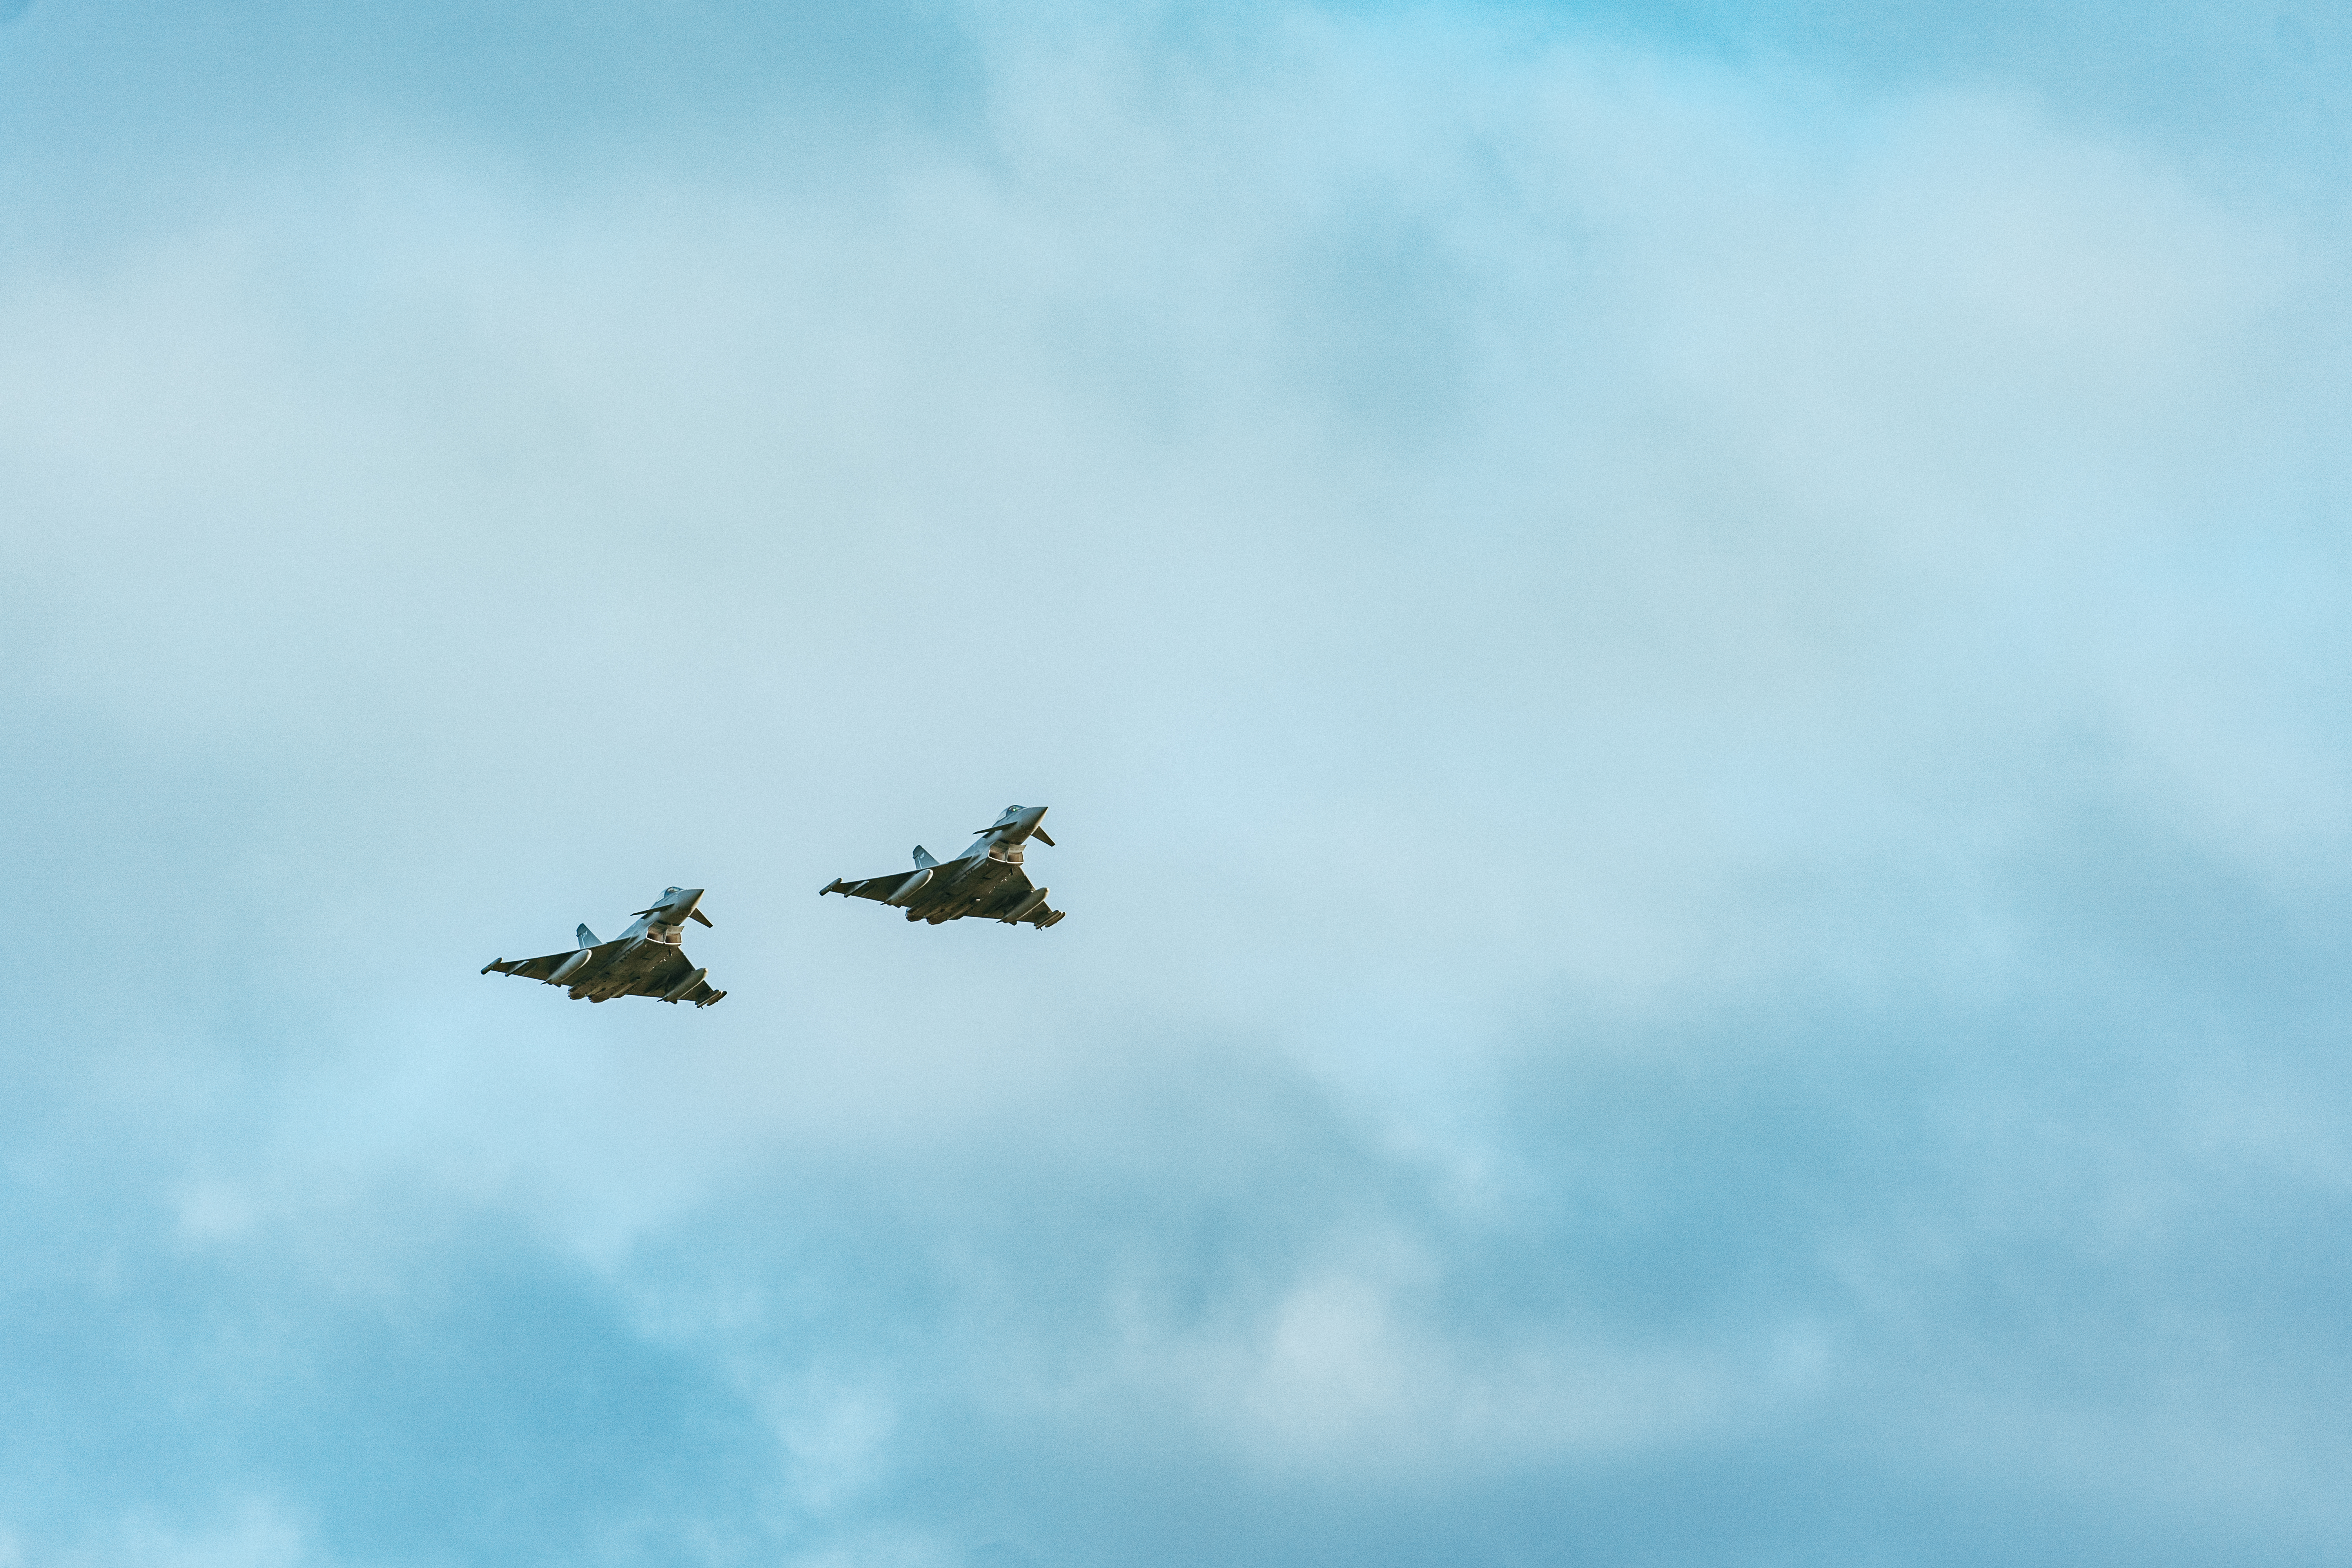 Image shows two RAF Typhoons in flight.